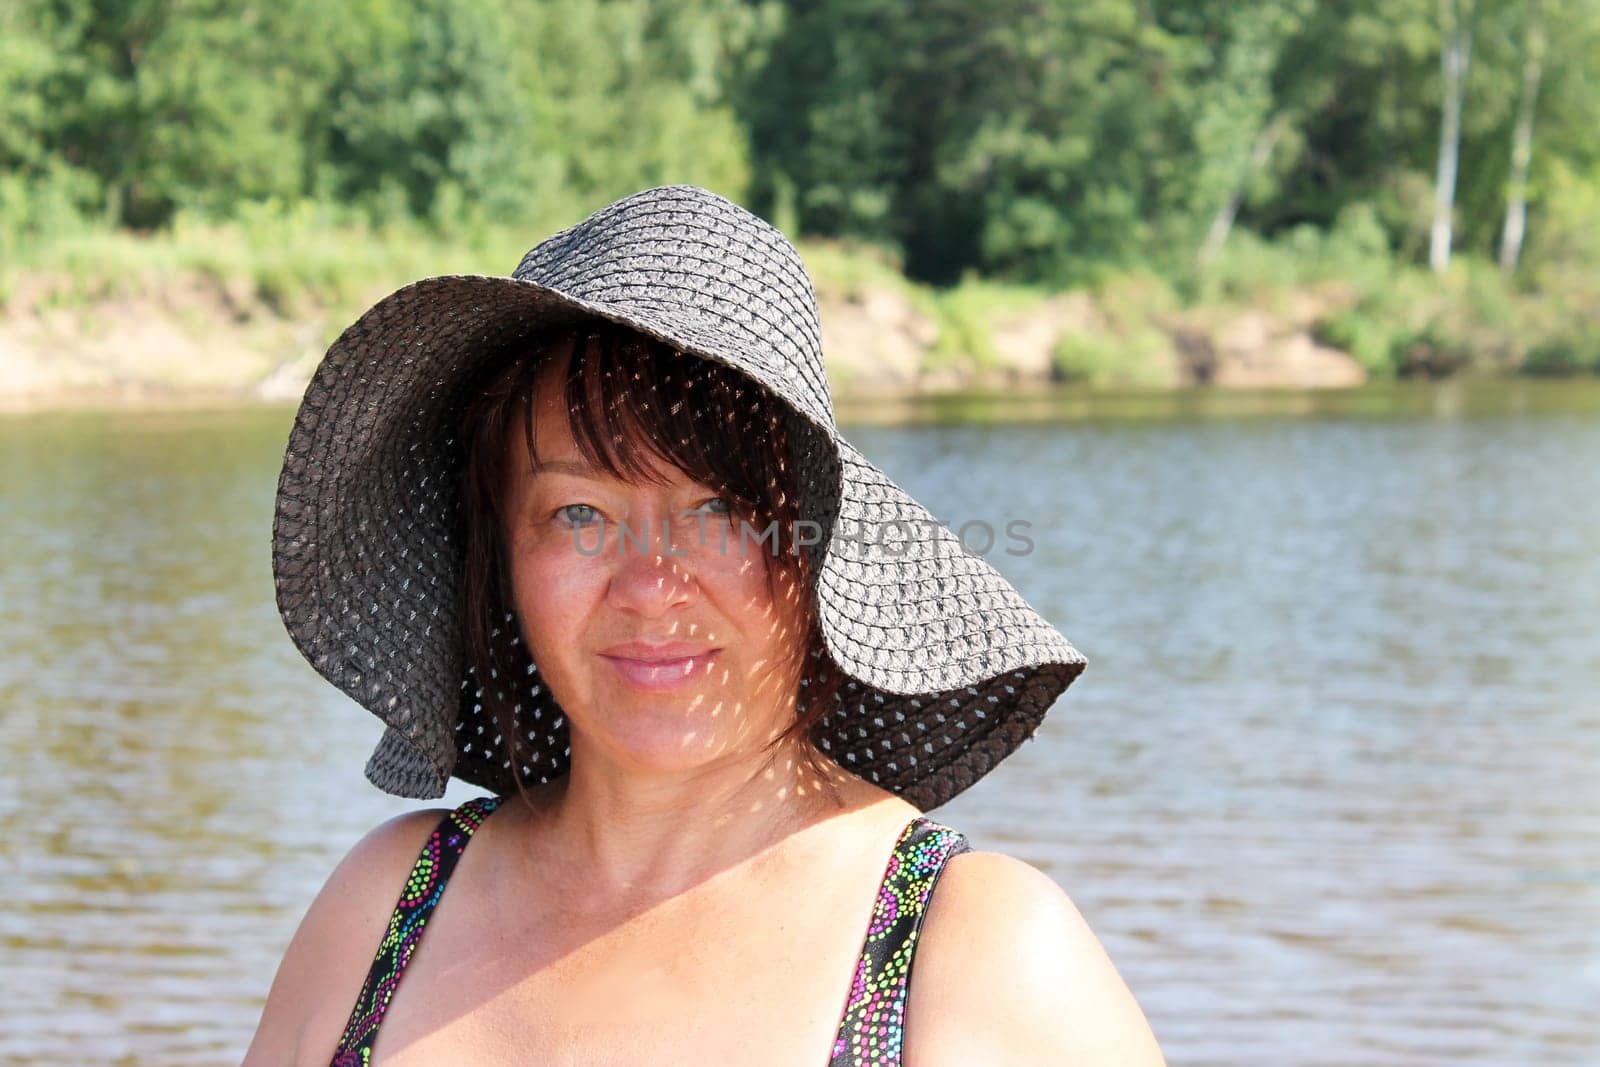 portrait of a smiling middle-aged brunette woman in a straw hat on the river bank on a sunny day.